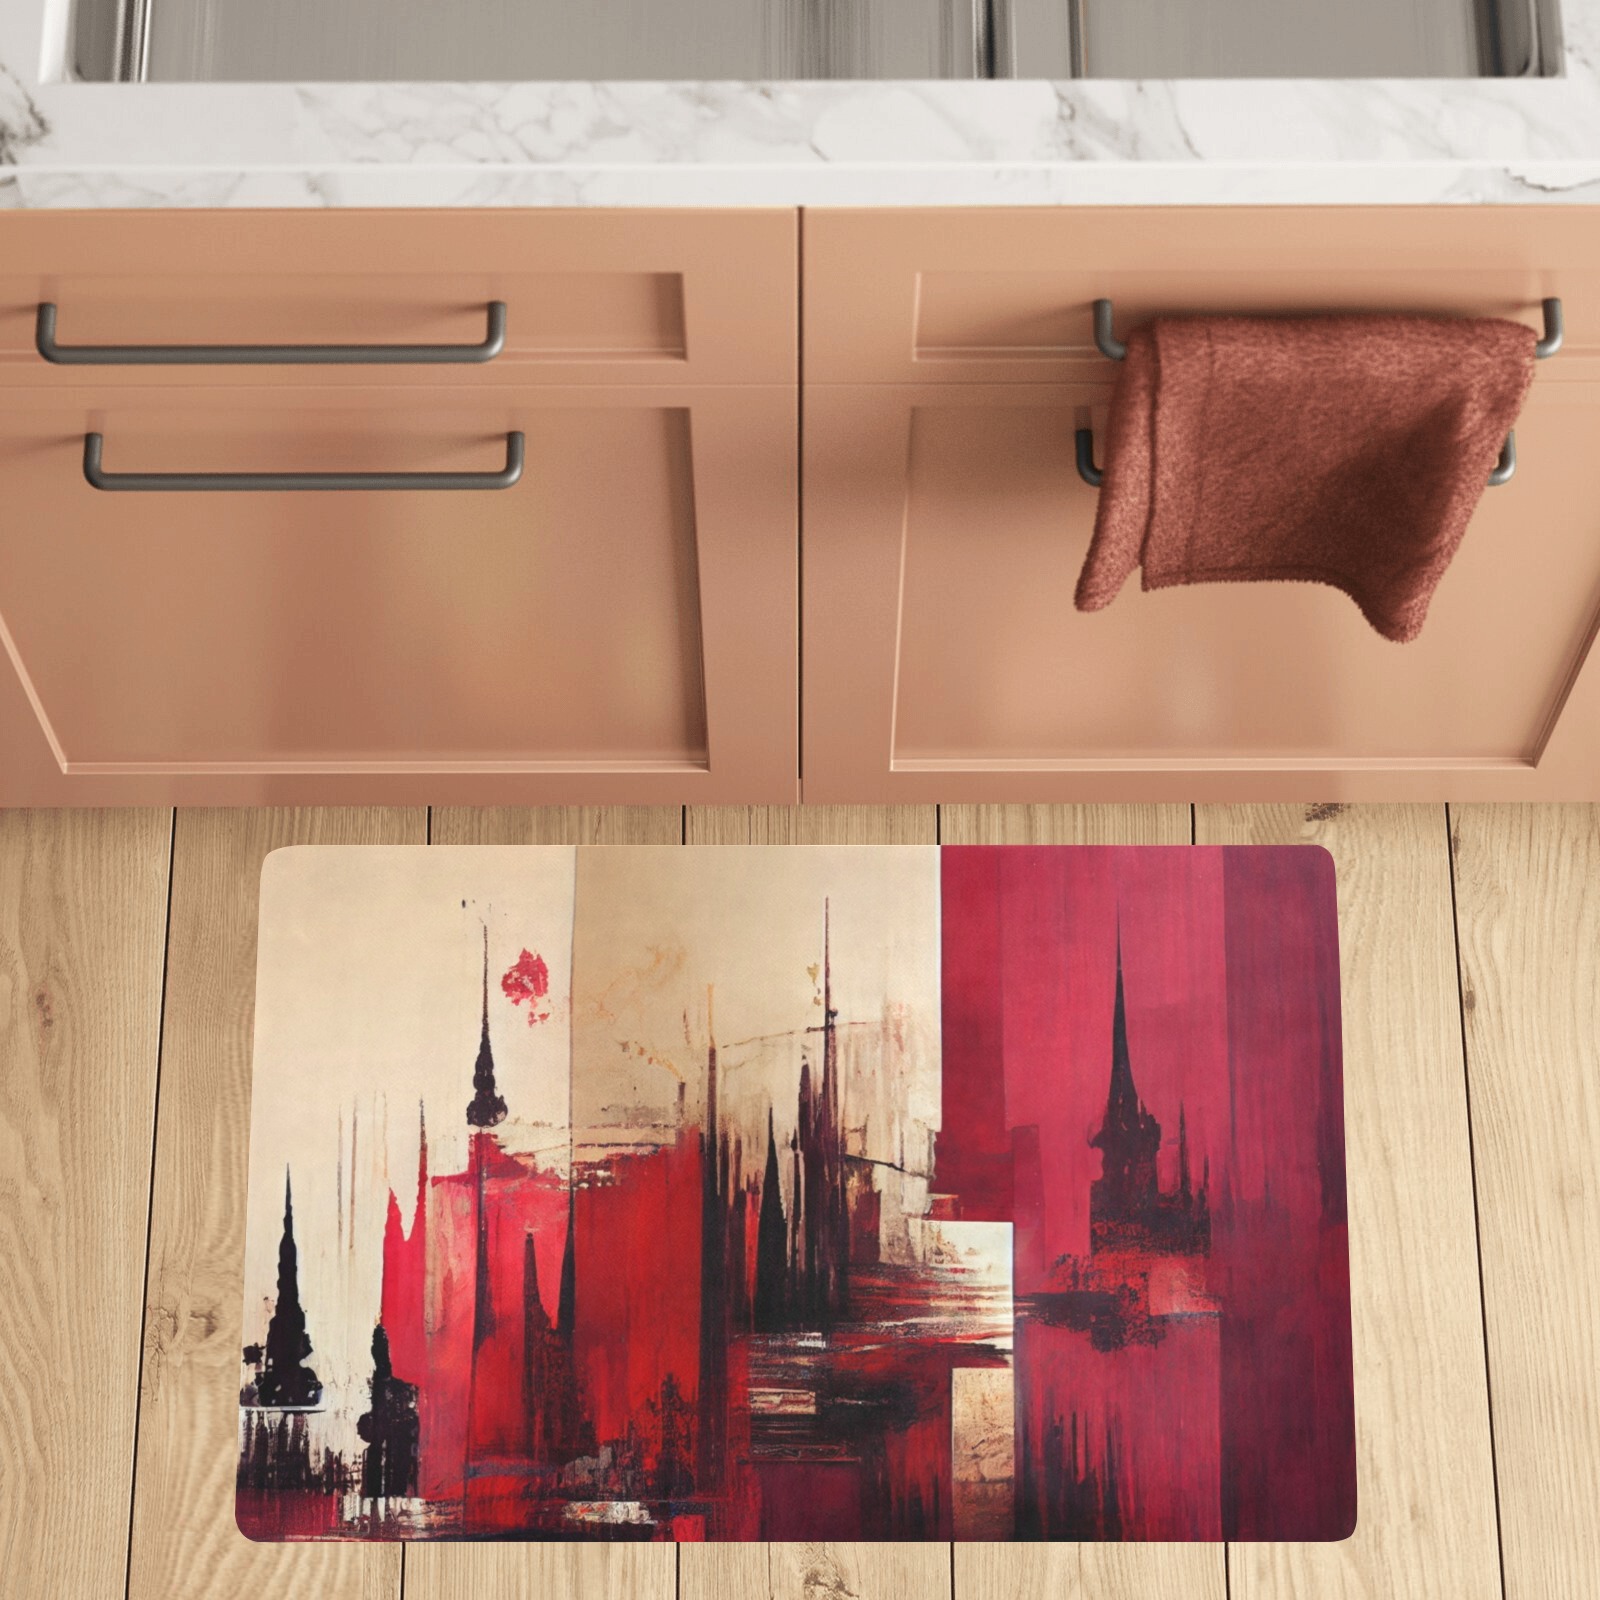 graffiti buildings red and cream 1 Kitchen Mat 32"x20"